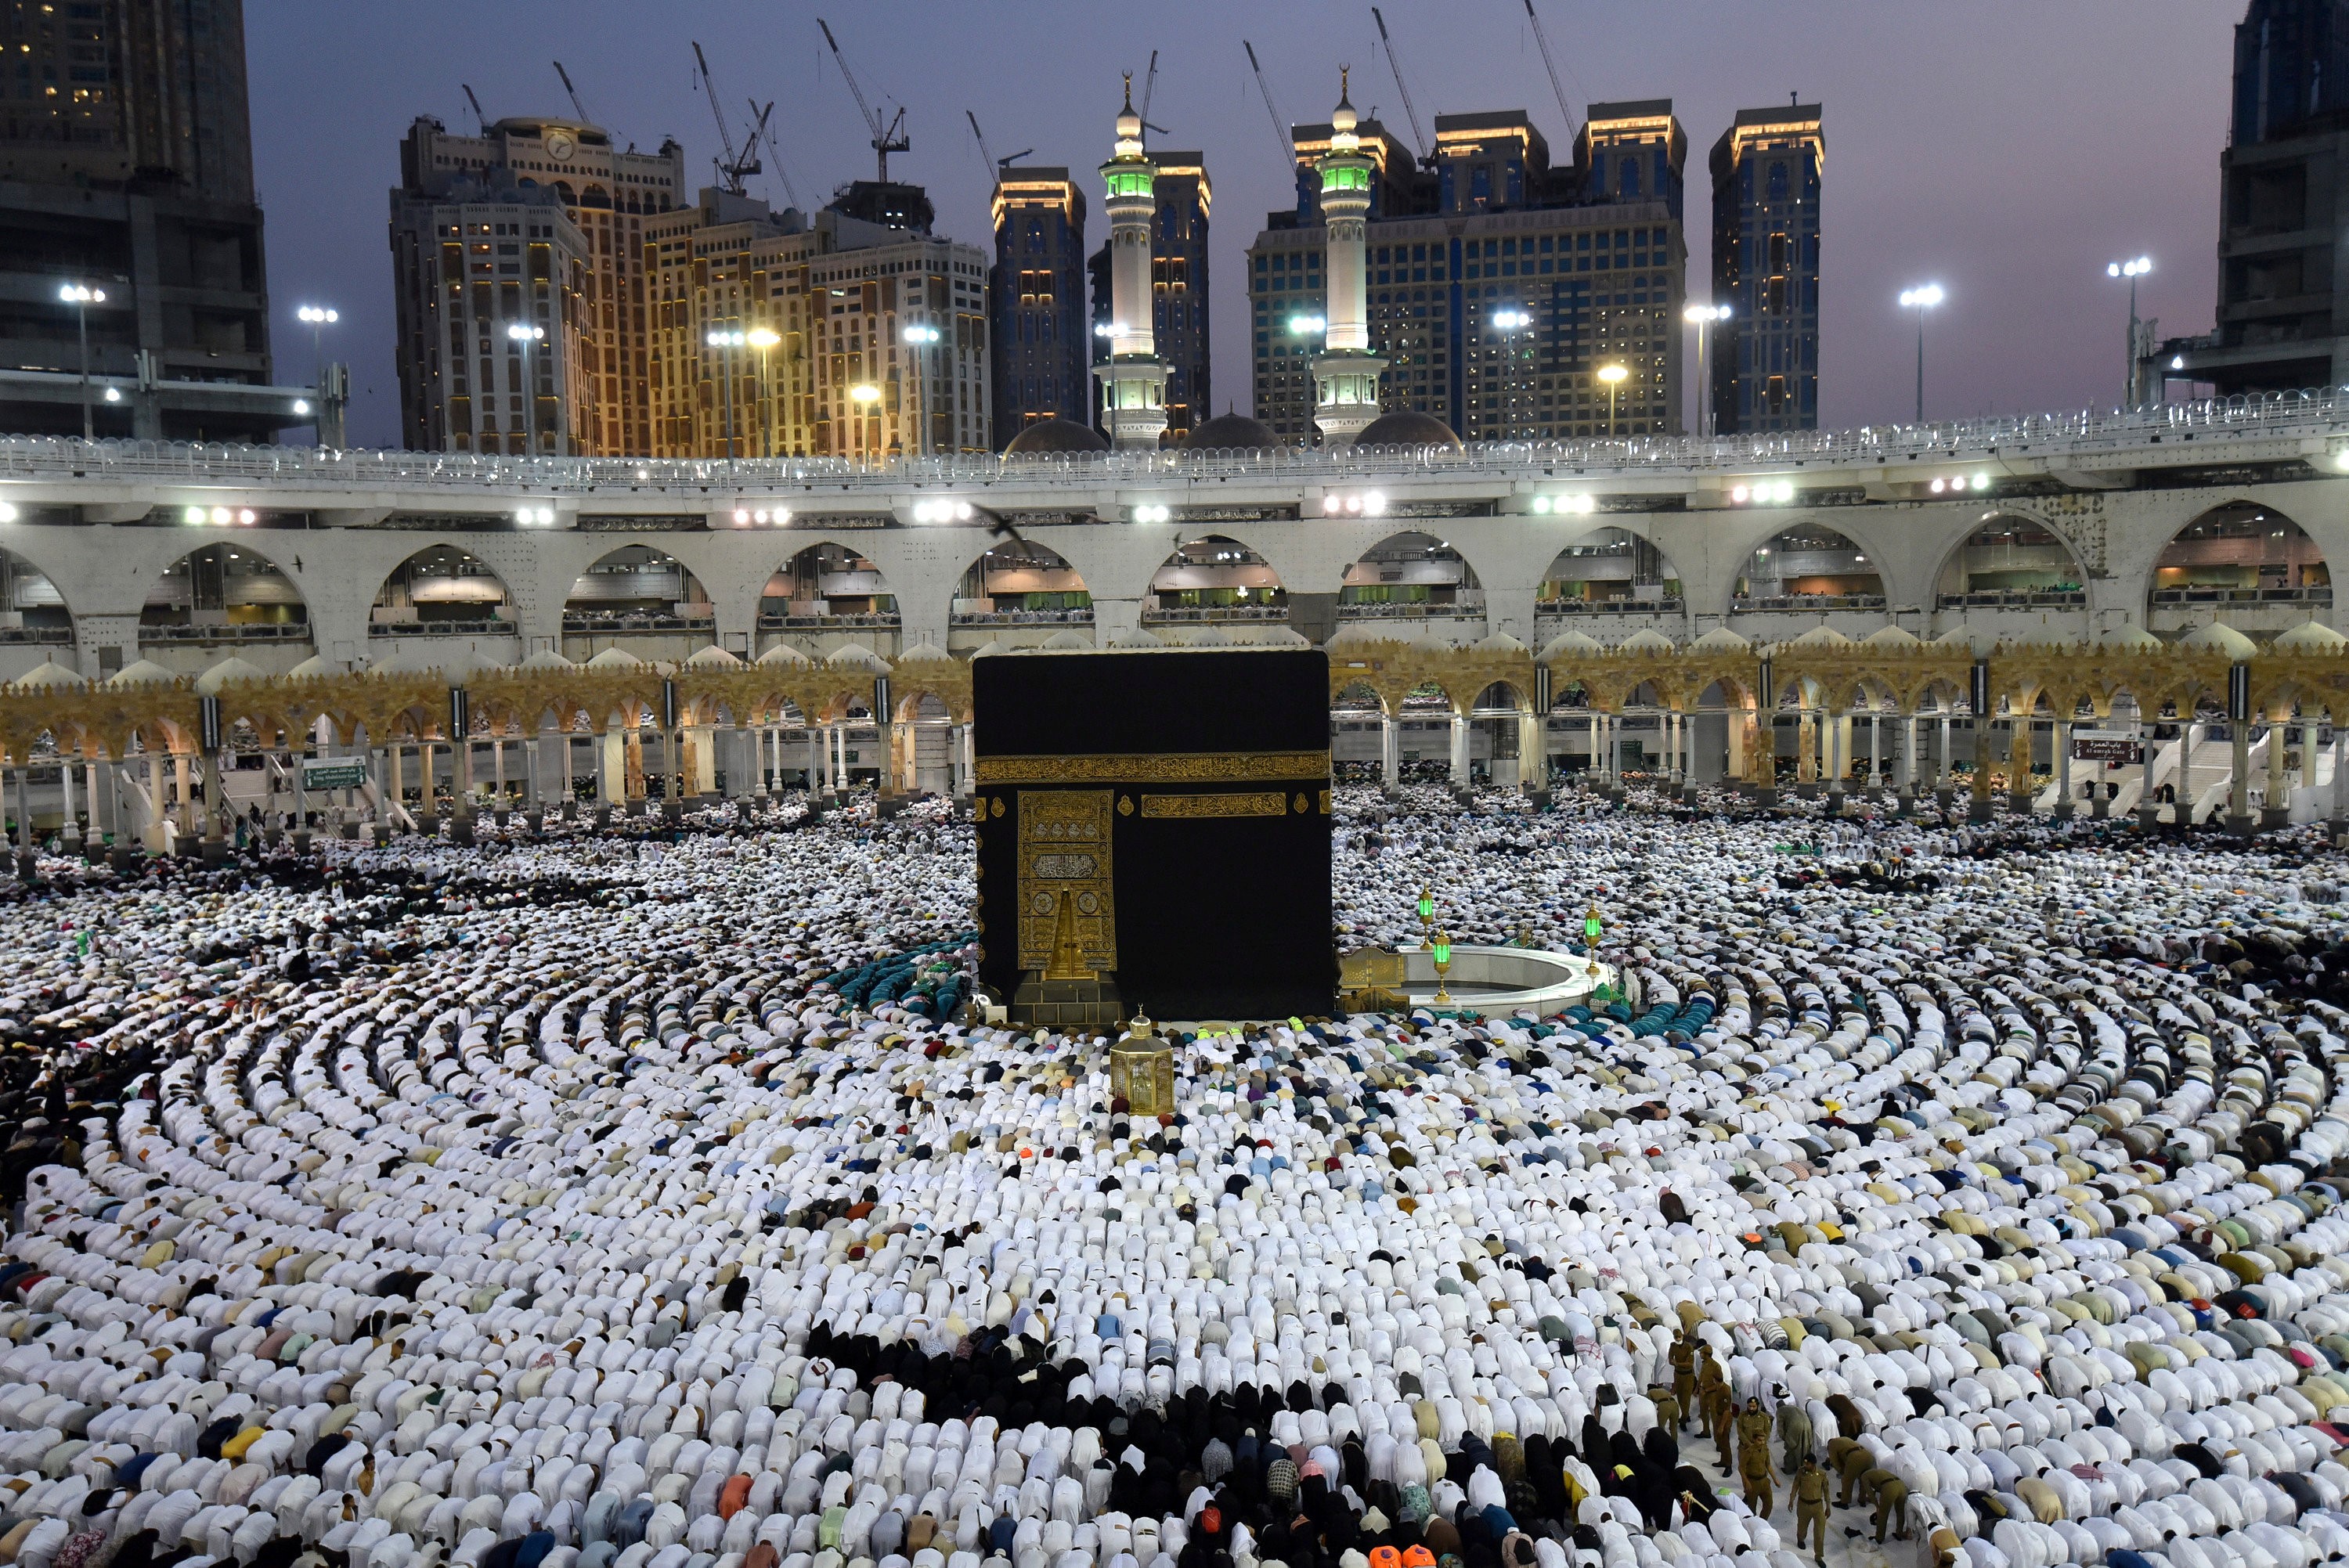 Muslims pray and gather around the holy Kaaba at the Great Mosque during the holy fasting month of Ramadan in Mecca, Saudi Arabia, May 26, 2019